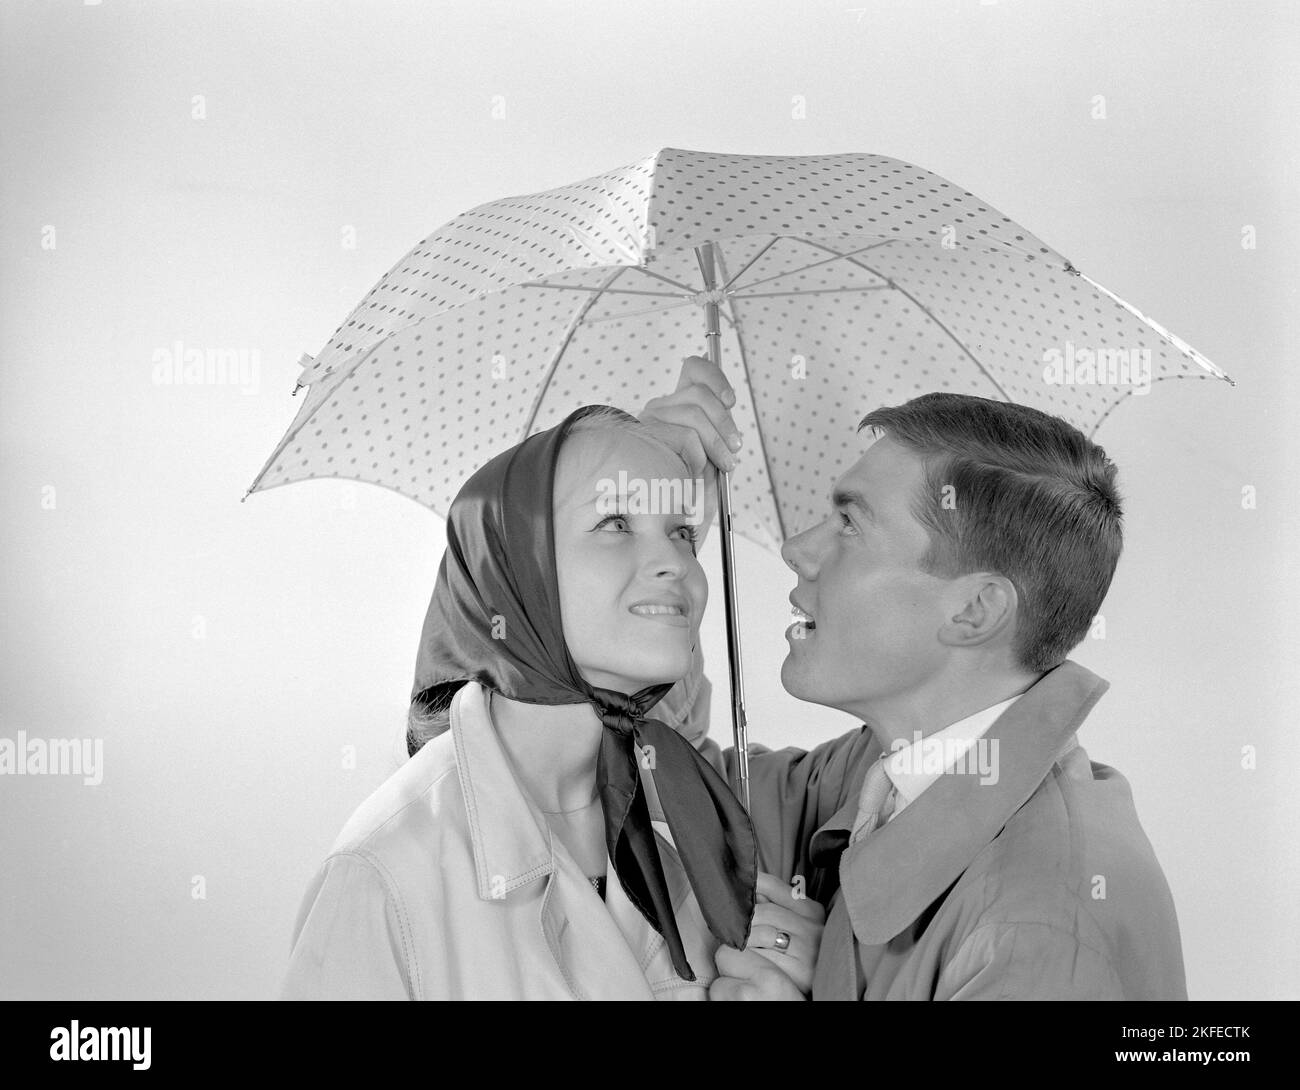 1960s couple. A happy smiling couple is standing under an umbrella. Sweden 1960 Conard ref 4254 Stock Photo